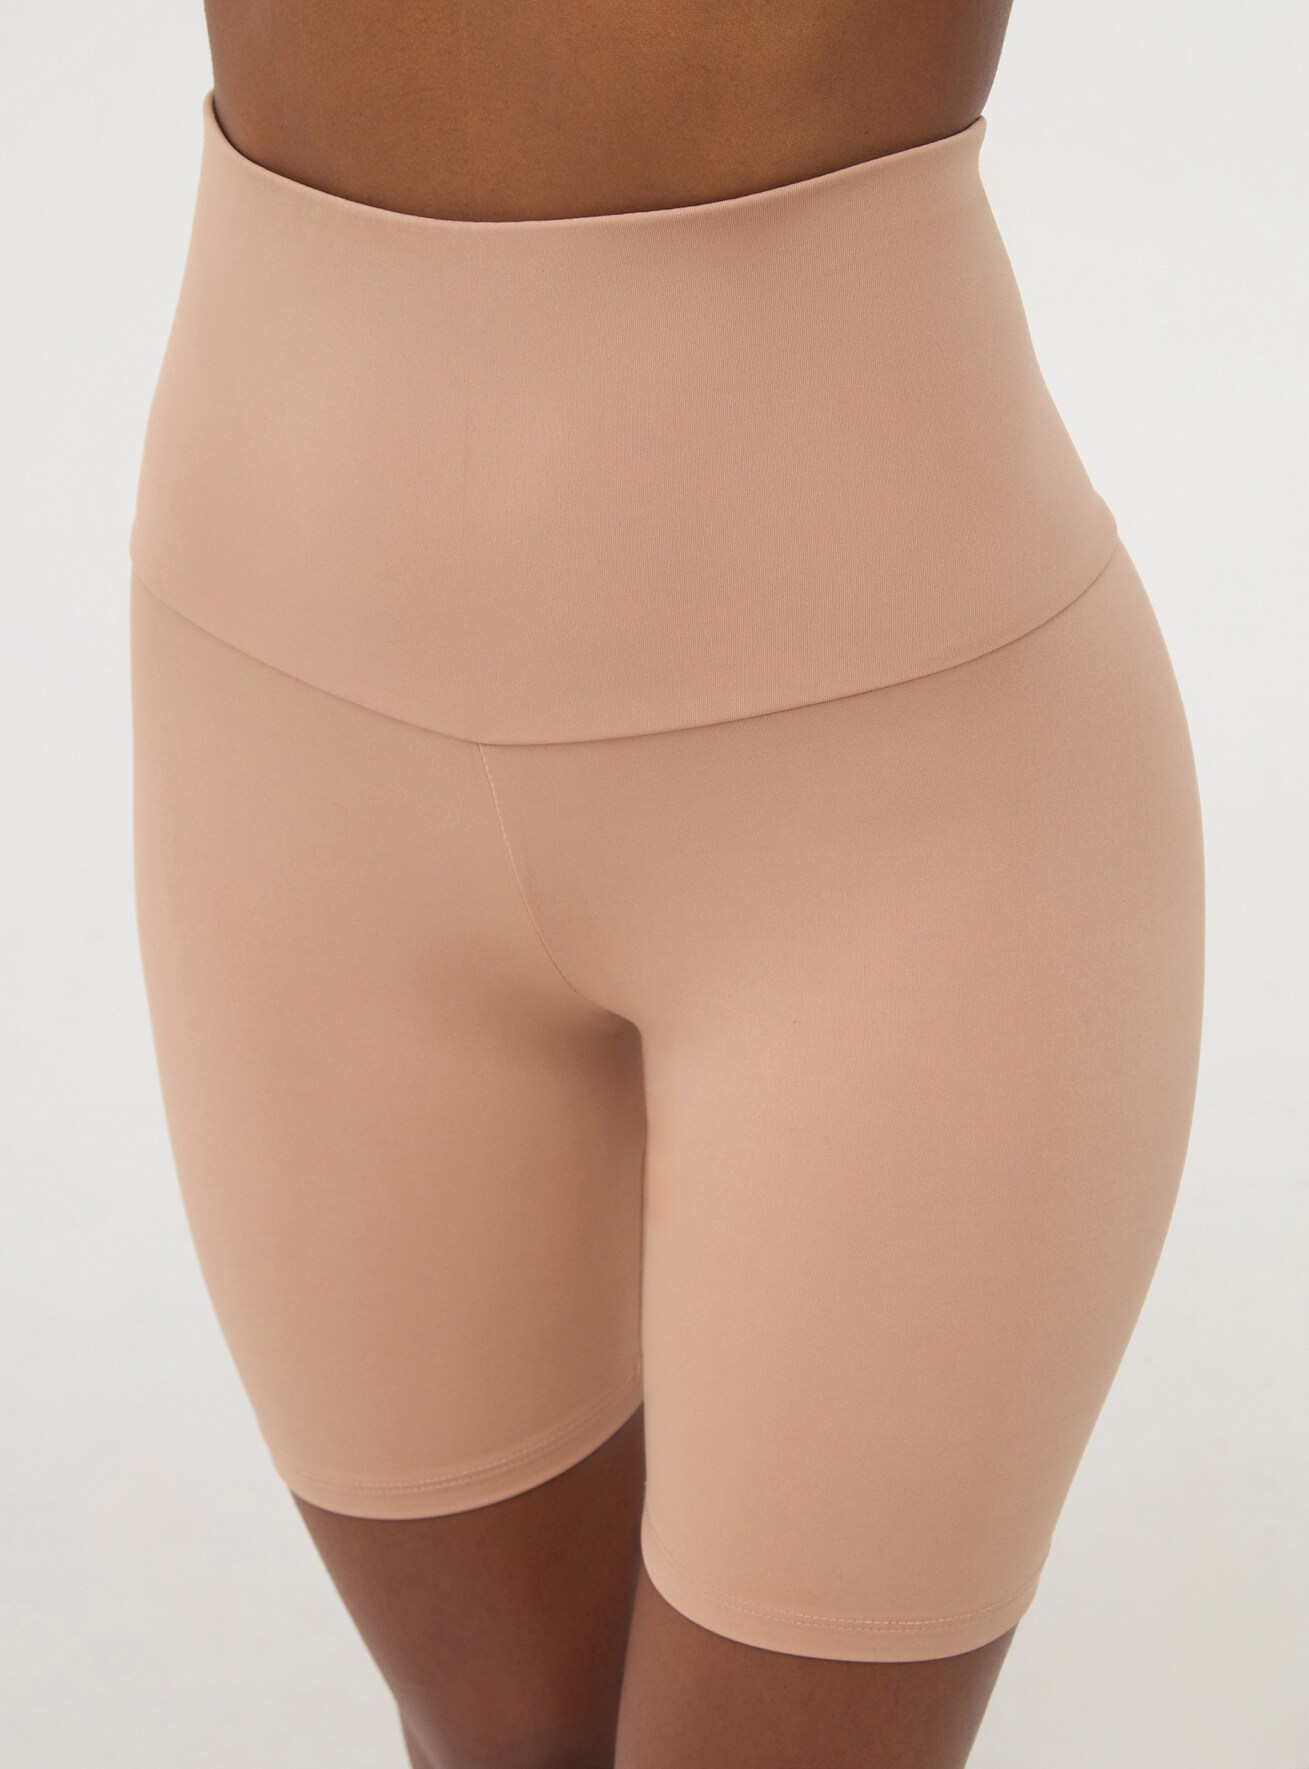 Shapewear for Women Tummy Control Shorts, Spanks Boyshorts High Waisted  Body Shaper Thigh Slimmer (Color : Beige, Size : Small) : :  Clothing, Shoes & Accessories